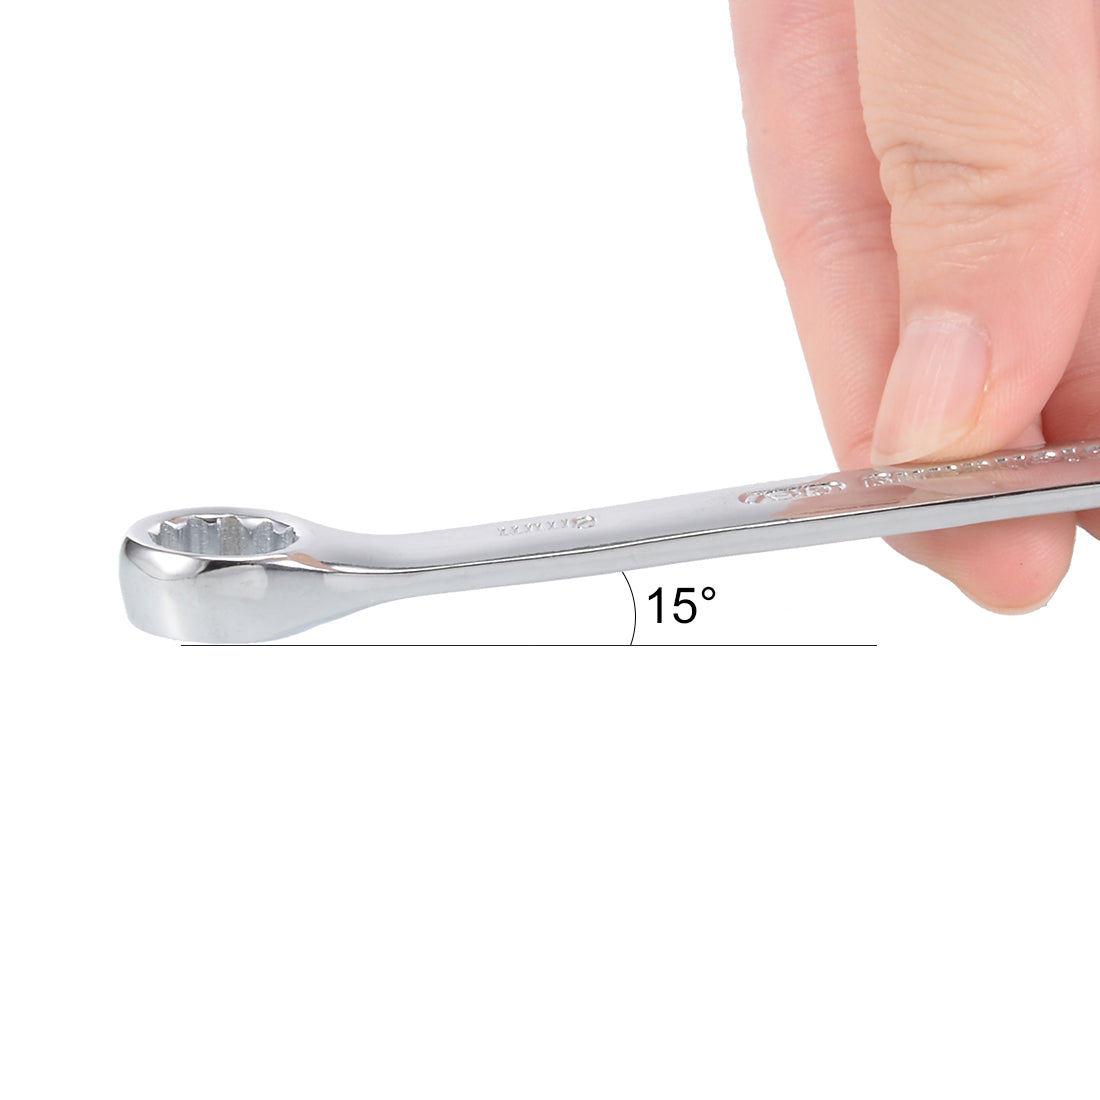 uxcell Uxcell Metric 8mm 12-Point Box Open End Combination Wrench Chrome Finish, Cr-V